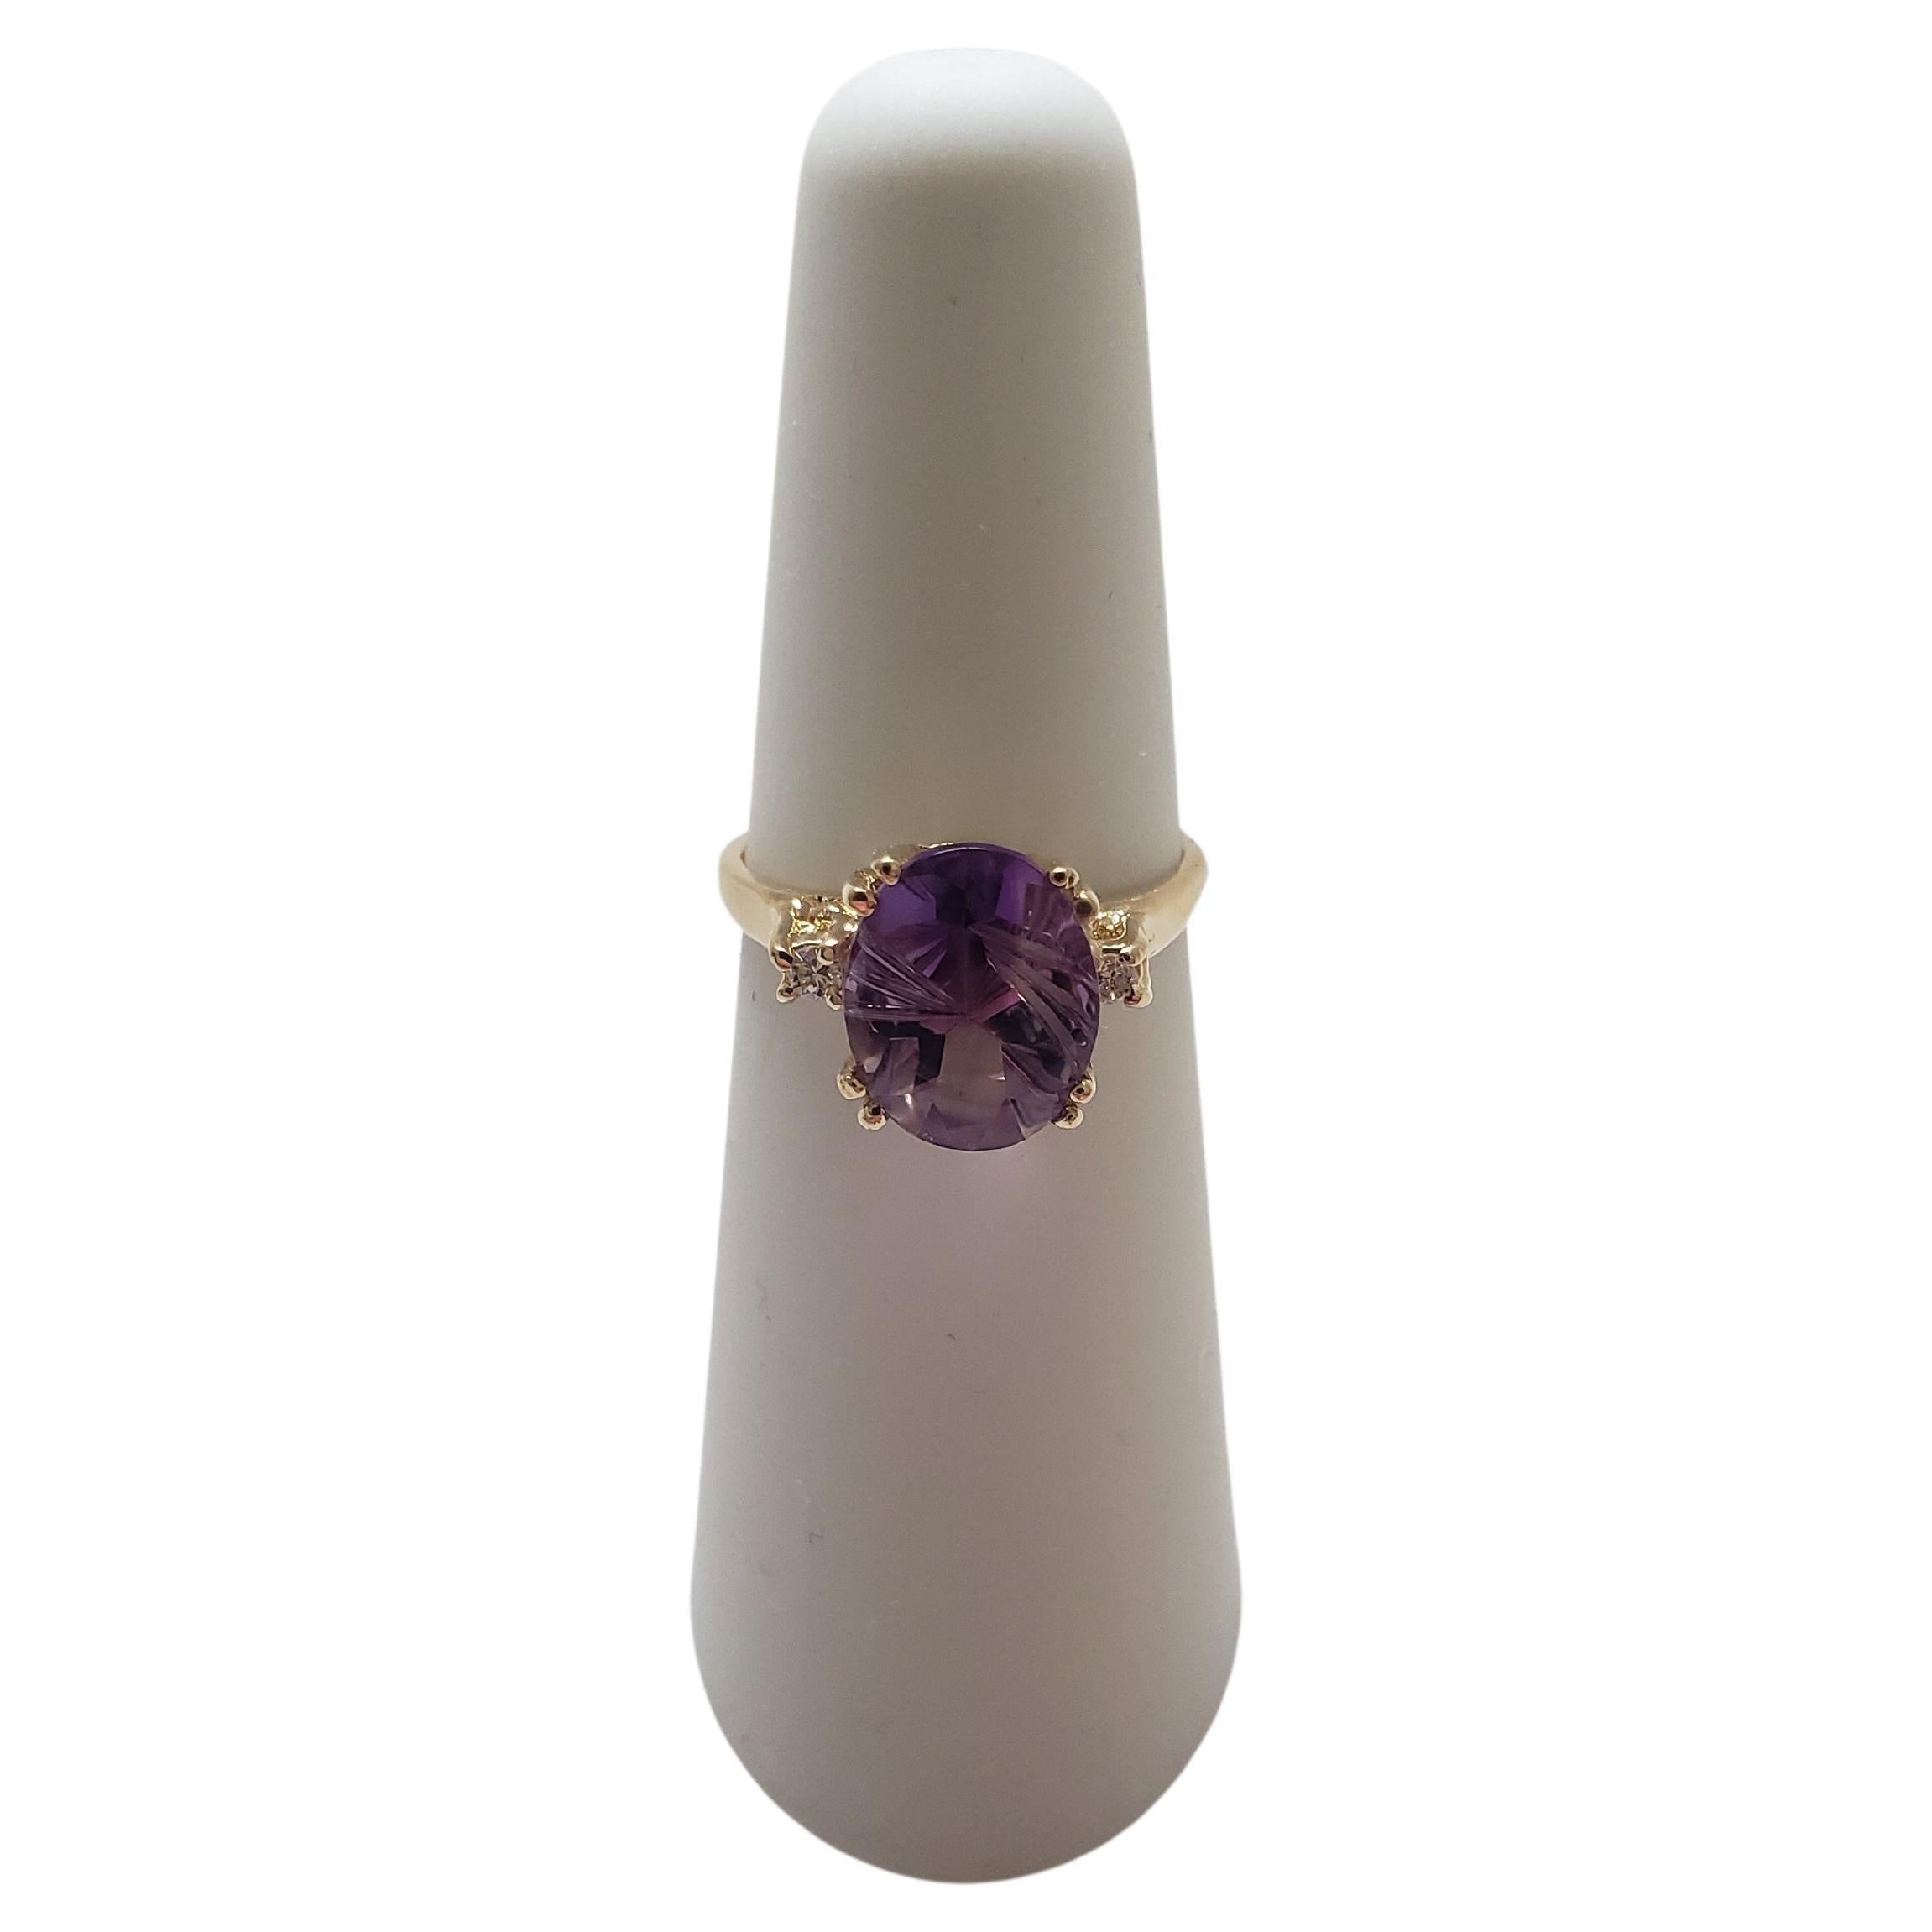 NEW 2 Ct. Natural Amethyst Fantasy Cut Ring with Diamonds in 14k Yellow Gold  For Sale